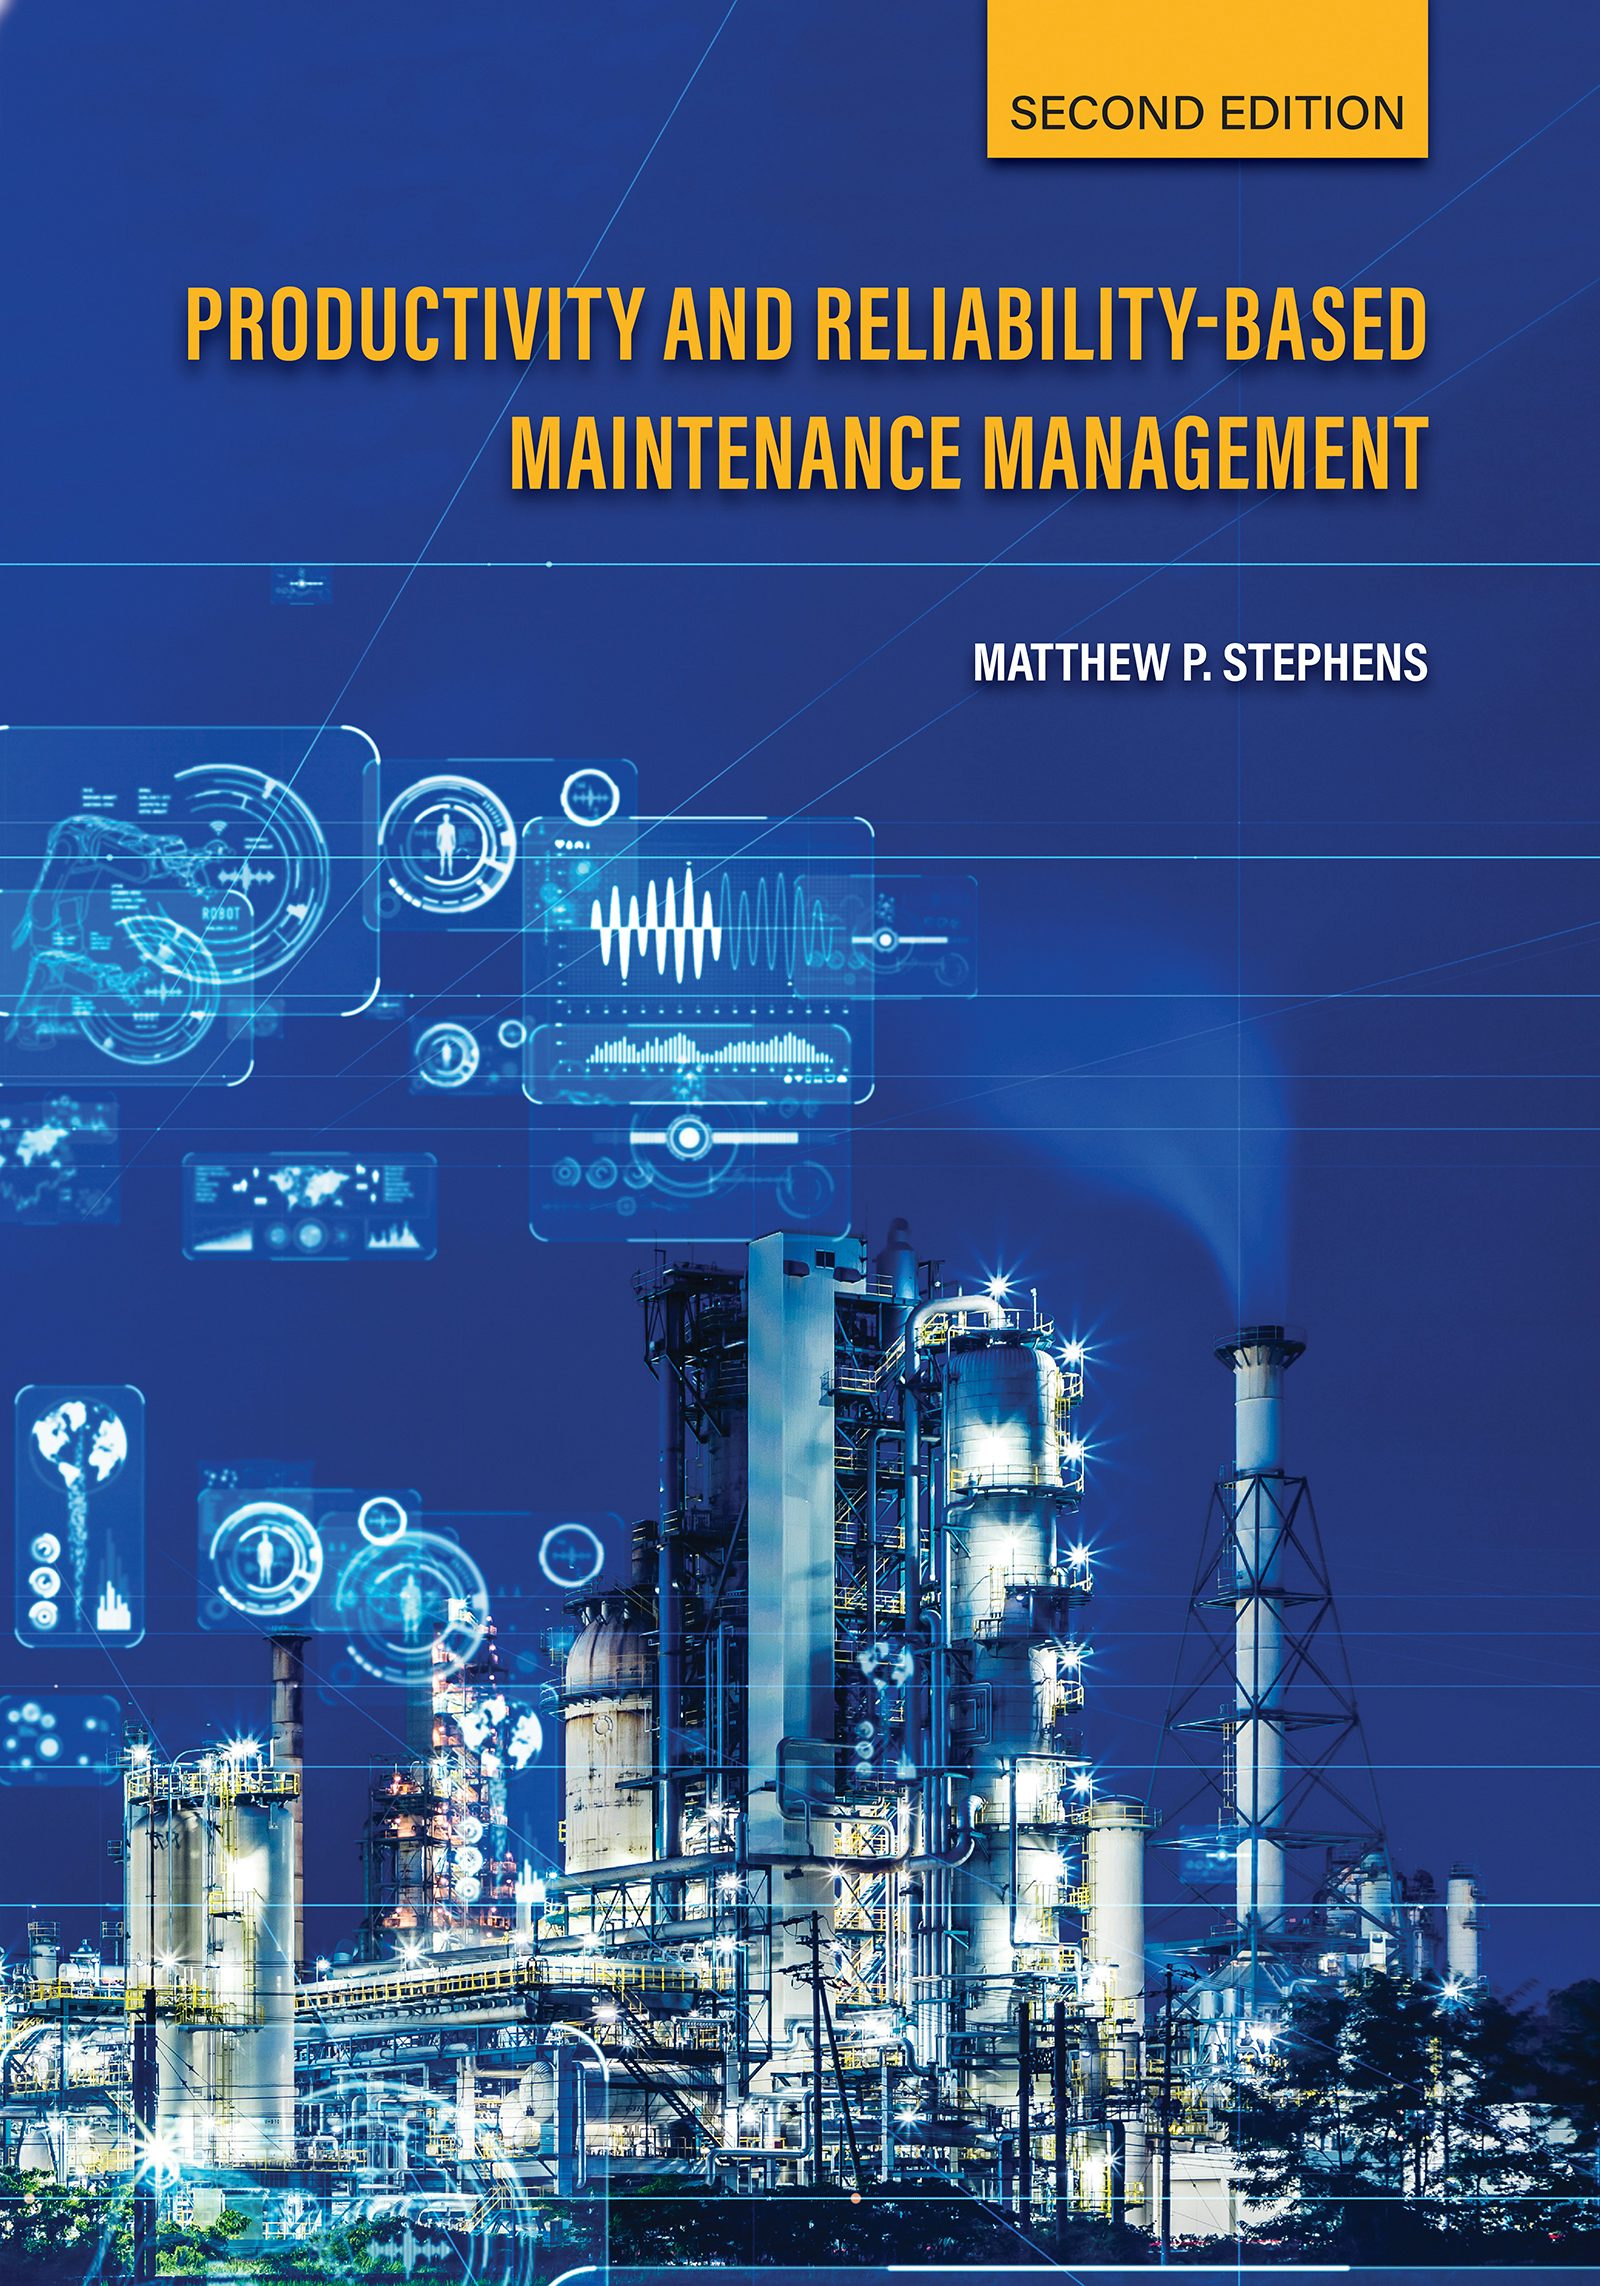 Productivity and Reliability-Based Maintenance Management, Second